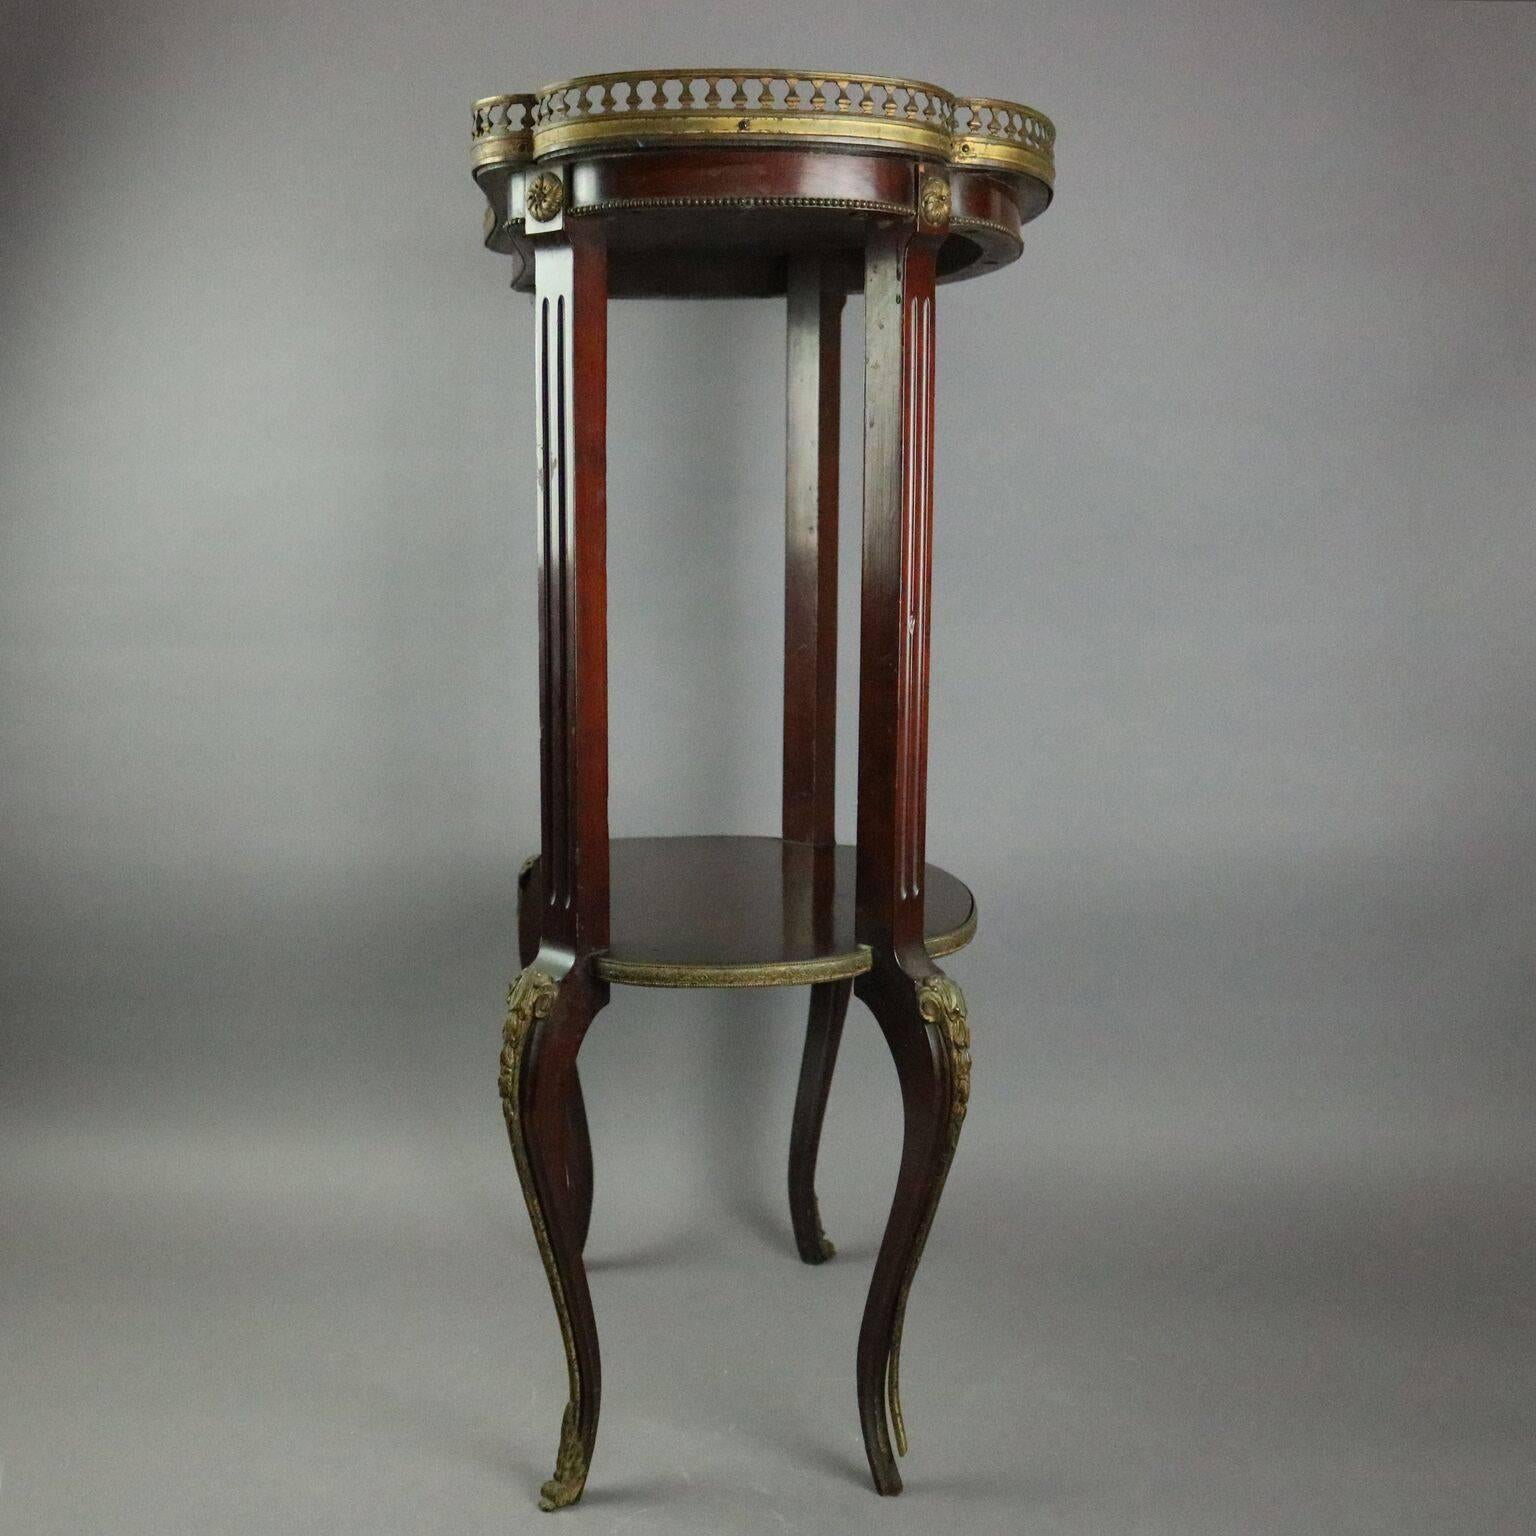 Bronze Antique French Louis XIV Style Mahogany and Ormolu Sculpture Stand, circa 1900